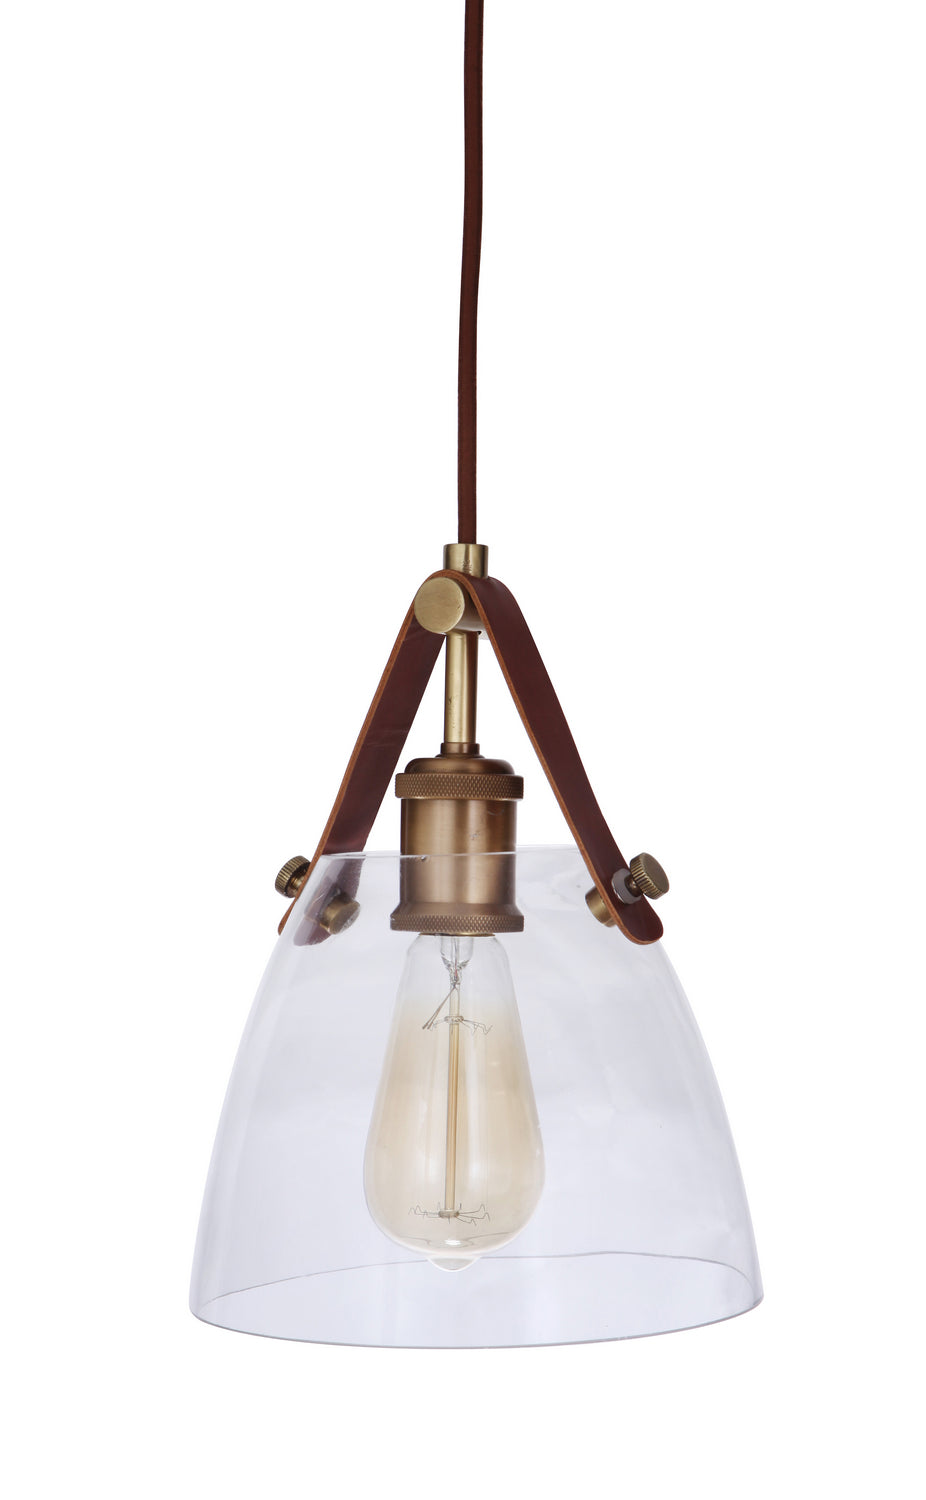 Craftmade One Light Pendant from the Hagen collection in Vintage Brass finish